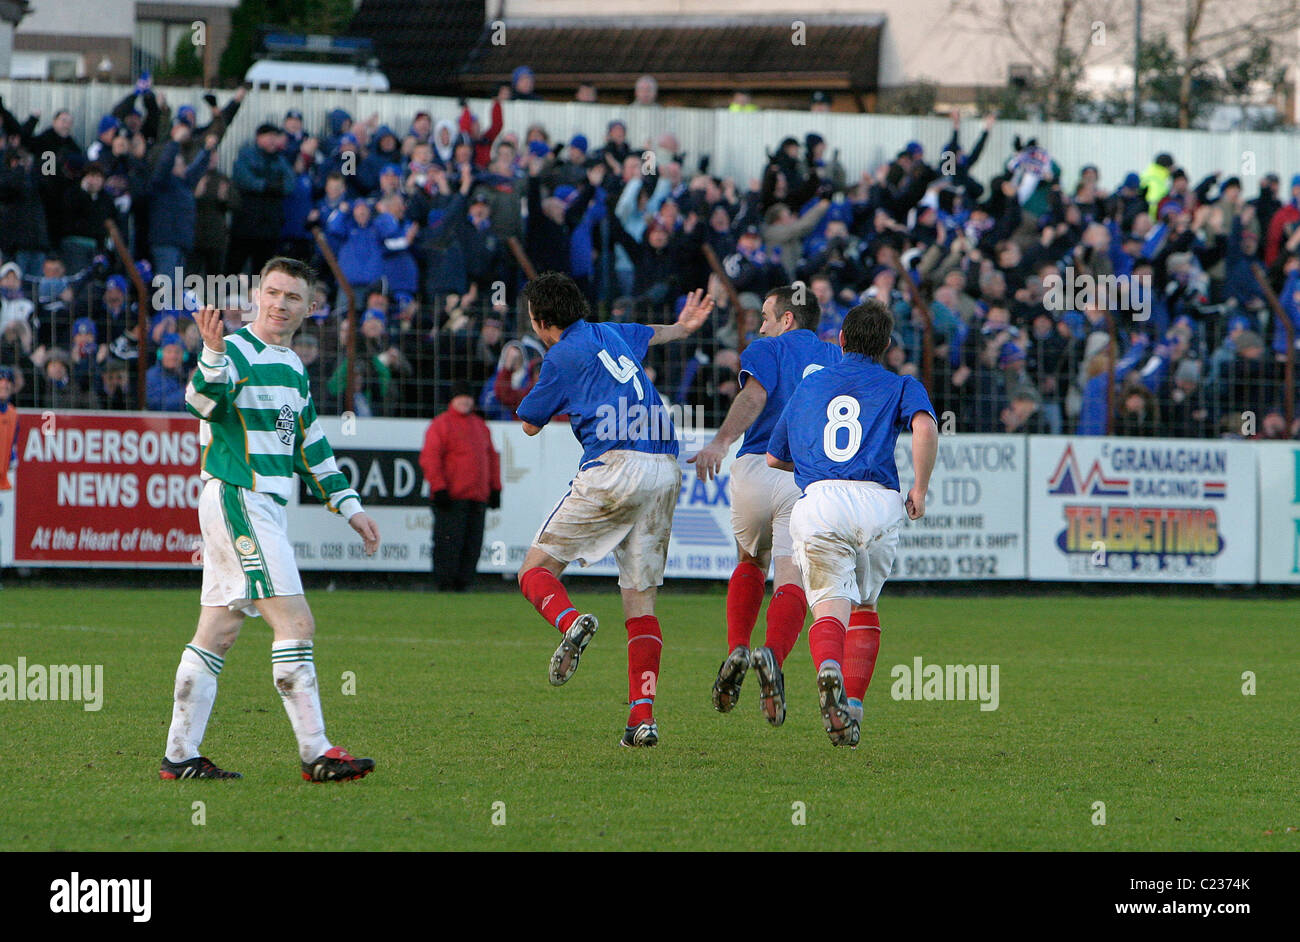 Action from the first meeting of Donegal Celtic v Linfield at Donegal Celtics ground in West Belfast. Stock Photo